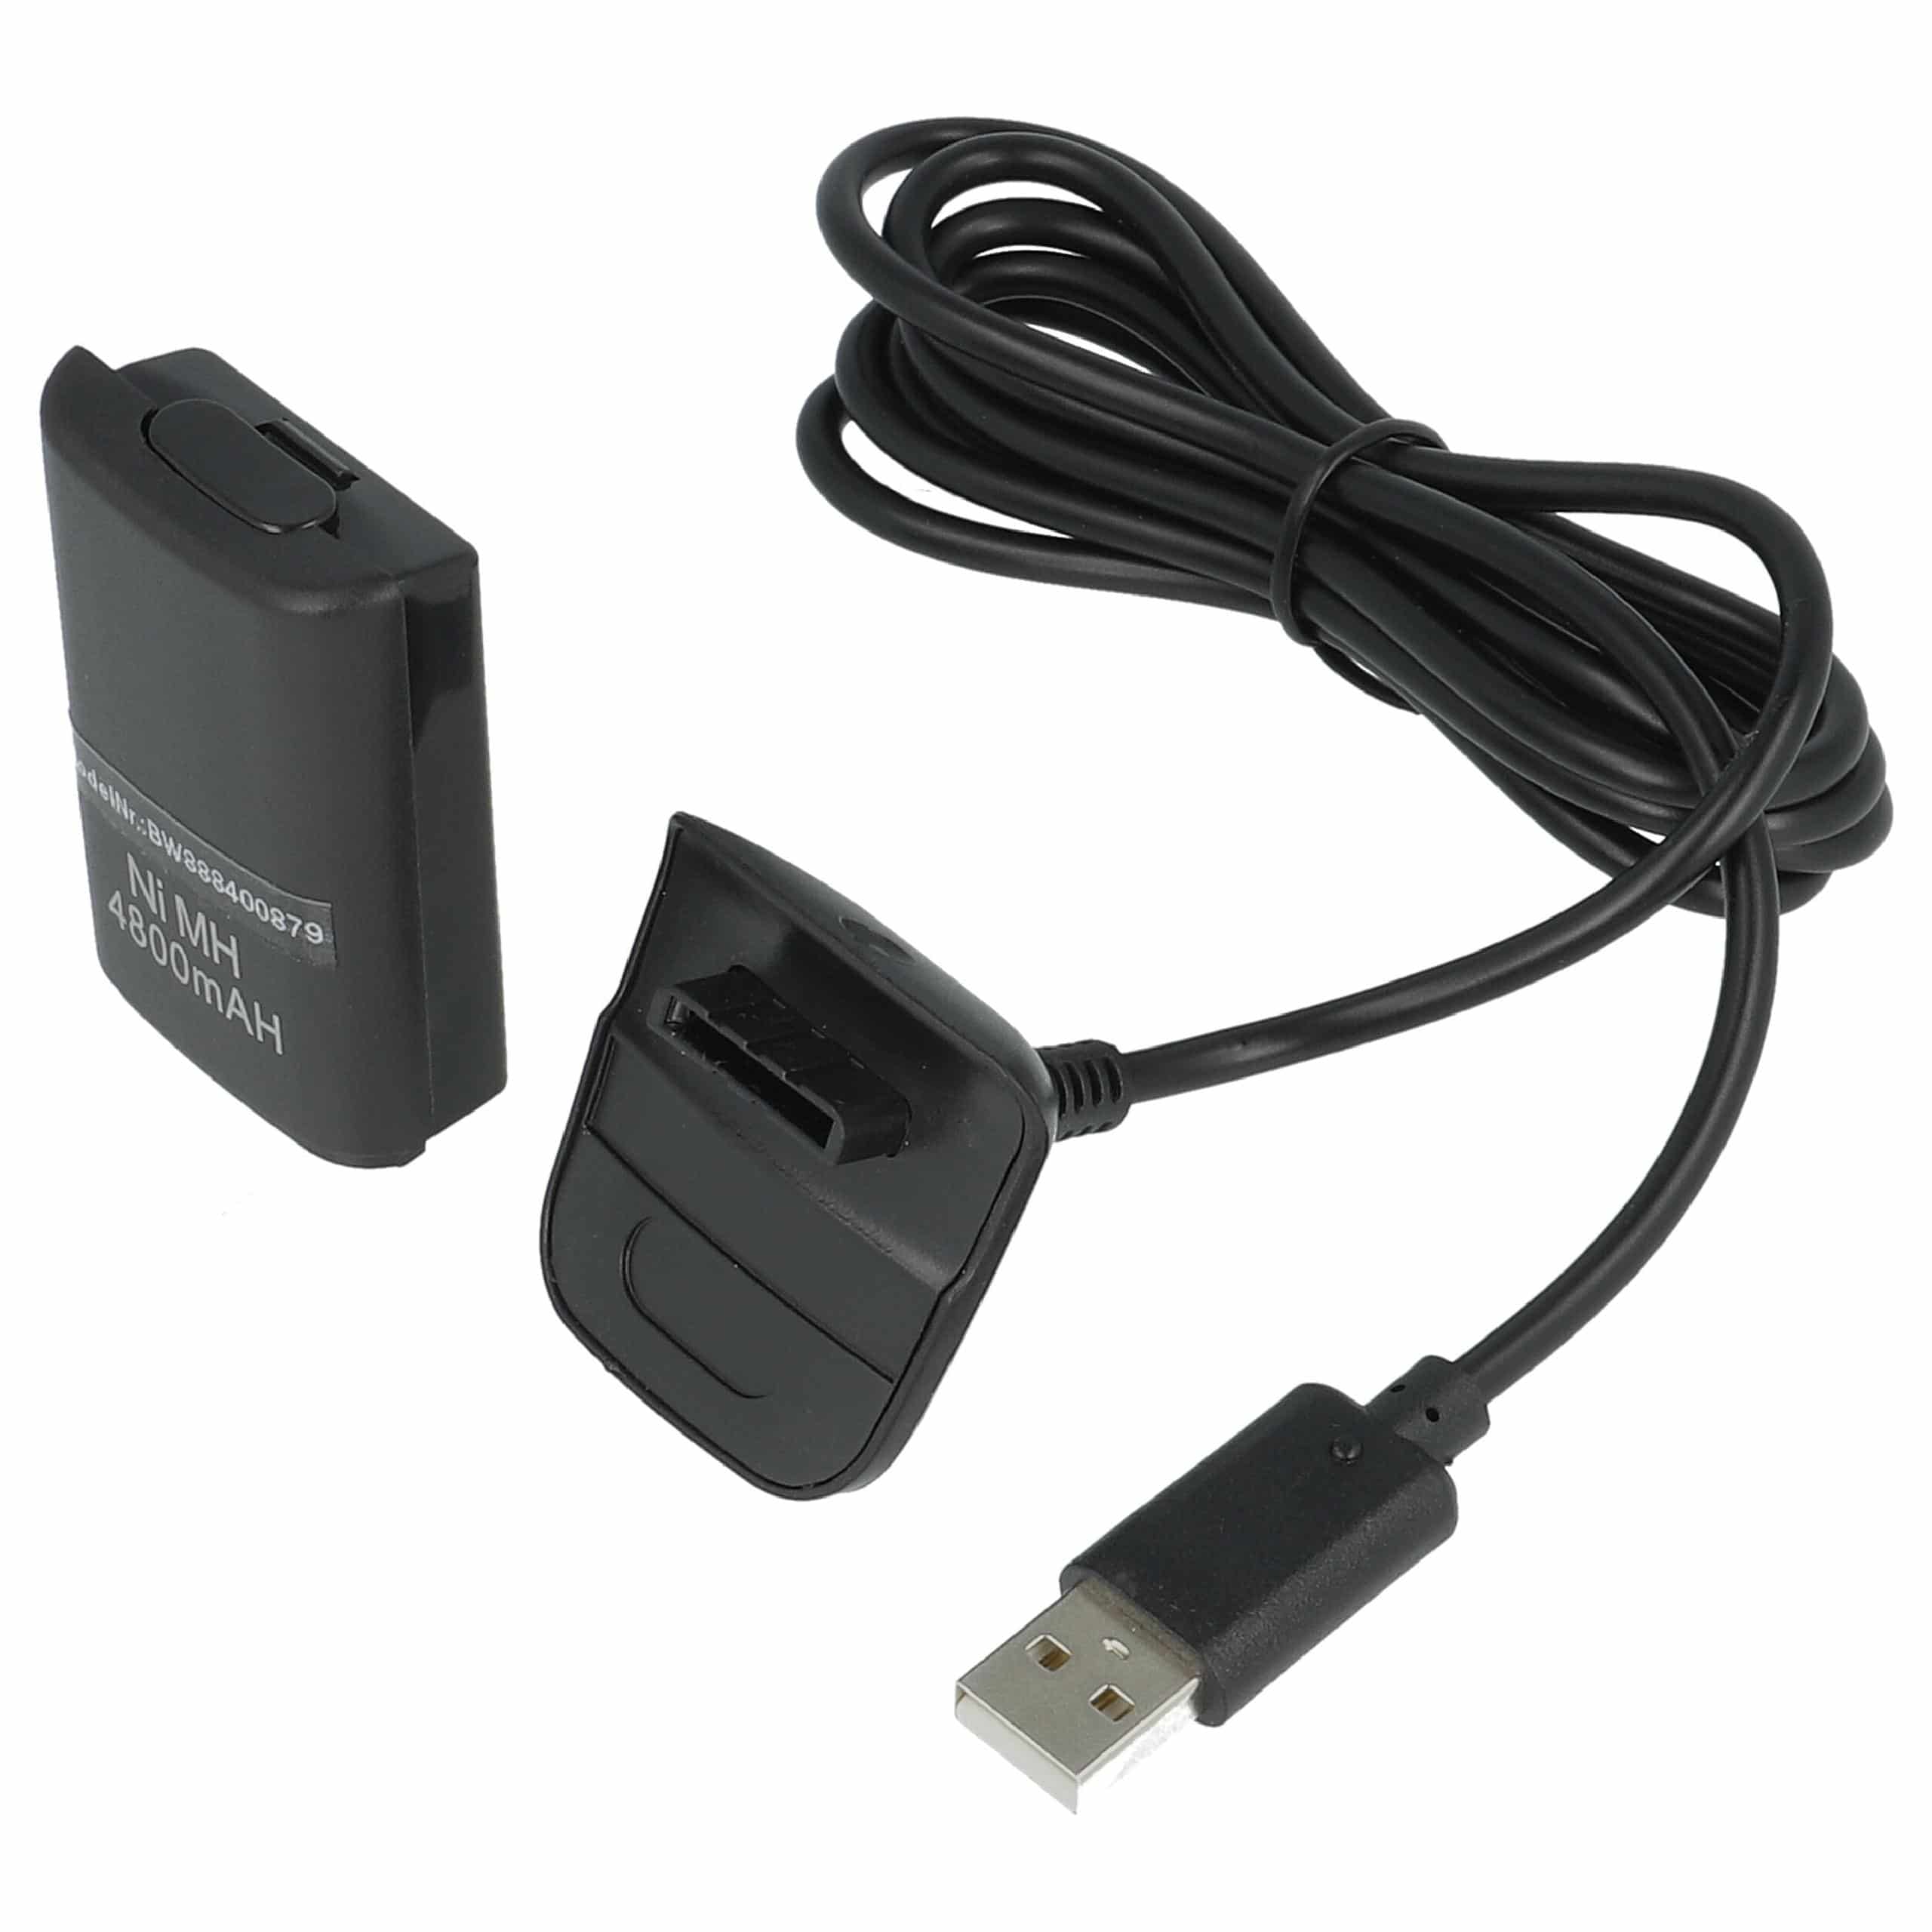 vhbw Play & Charge Kit - 1x charging cable, 1x battery Black